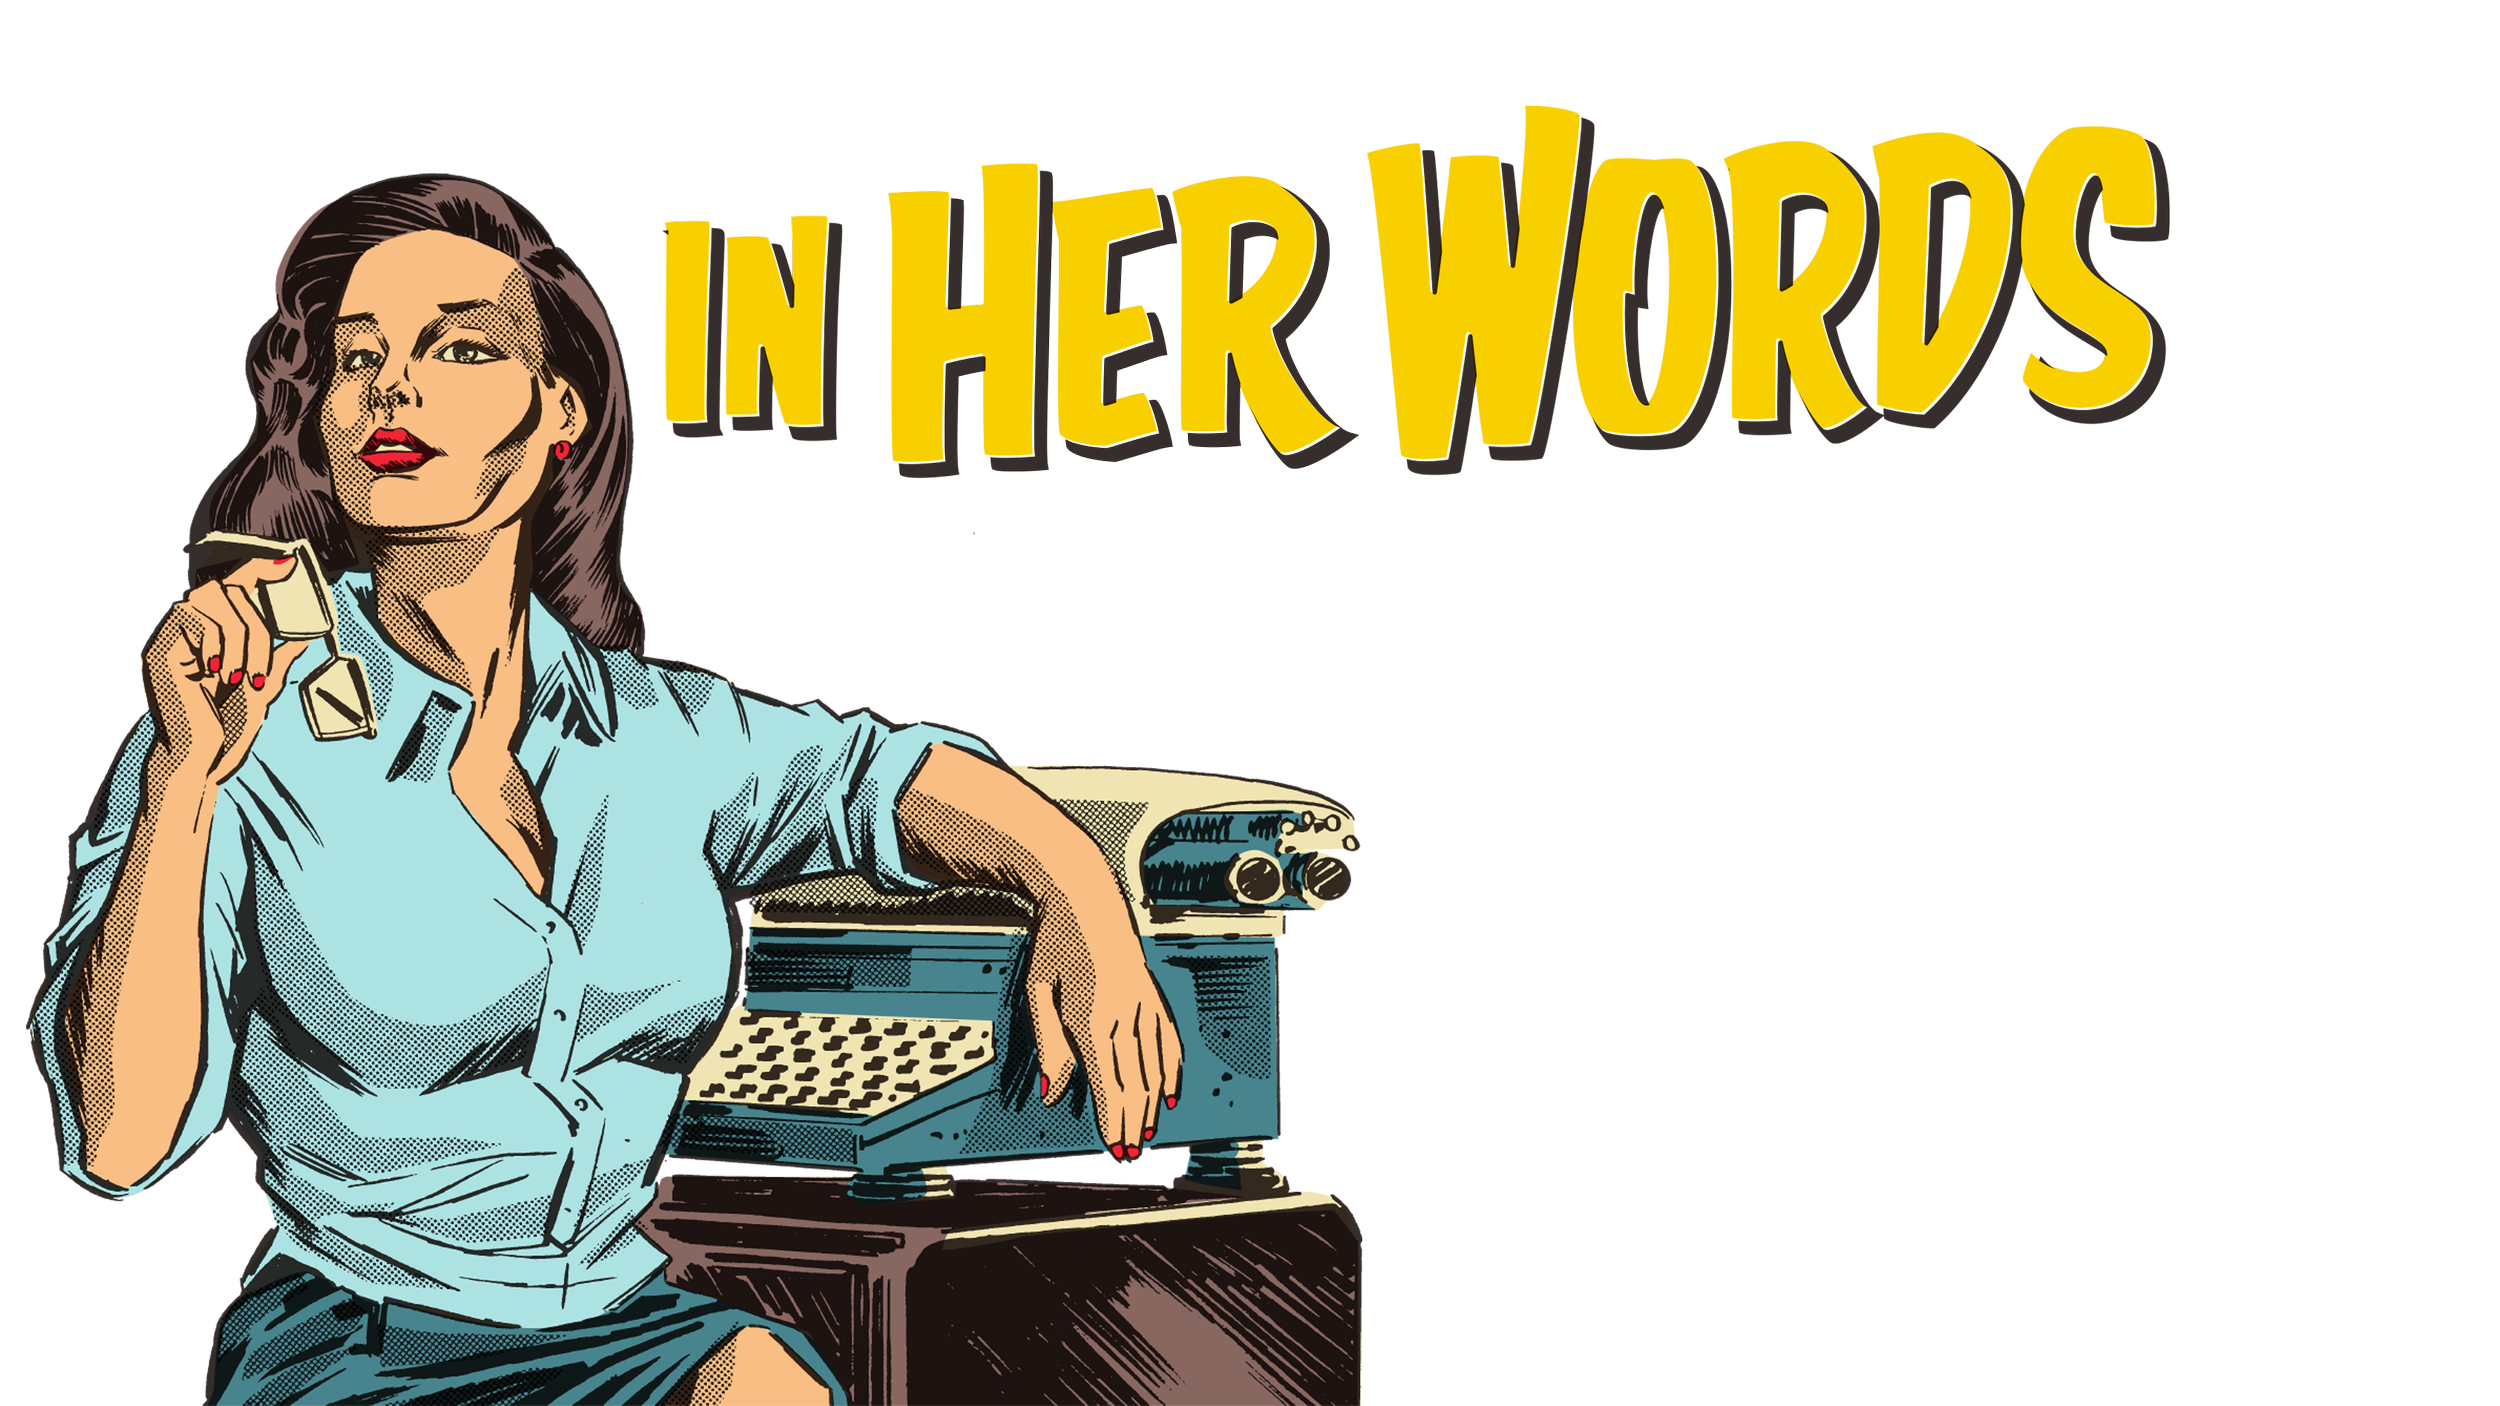 In Her Words: 20th Century Lesbian Fiction